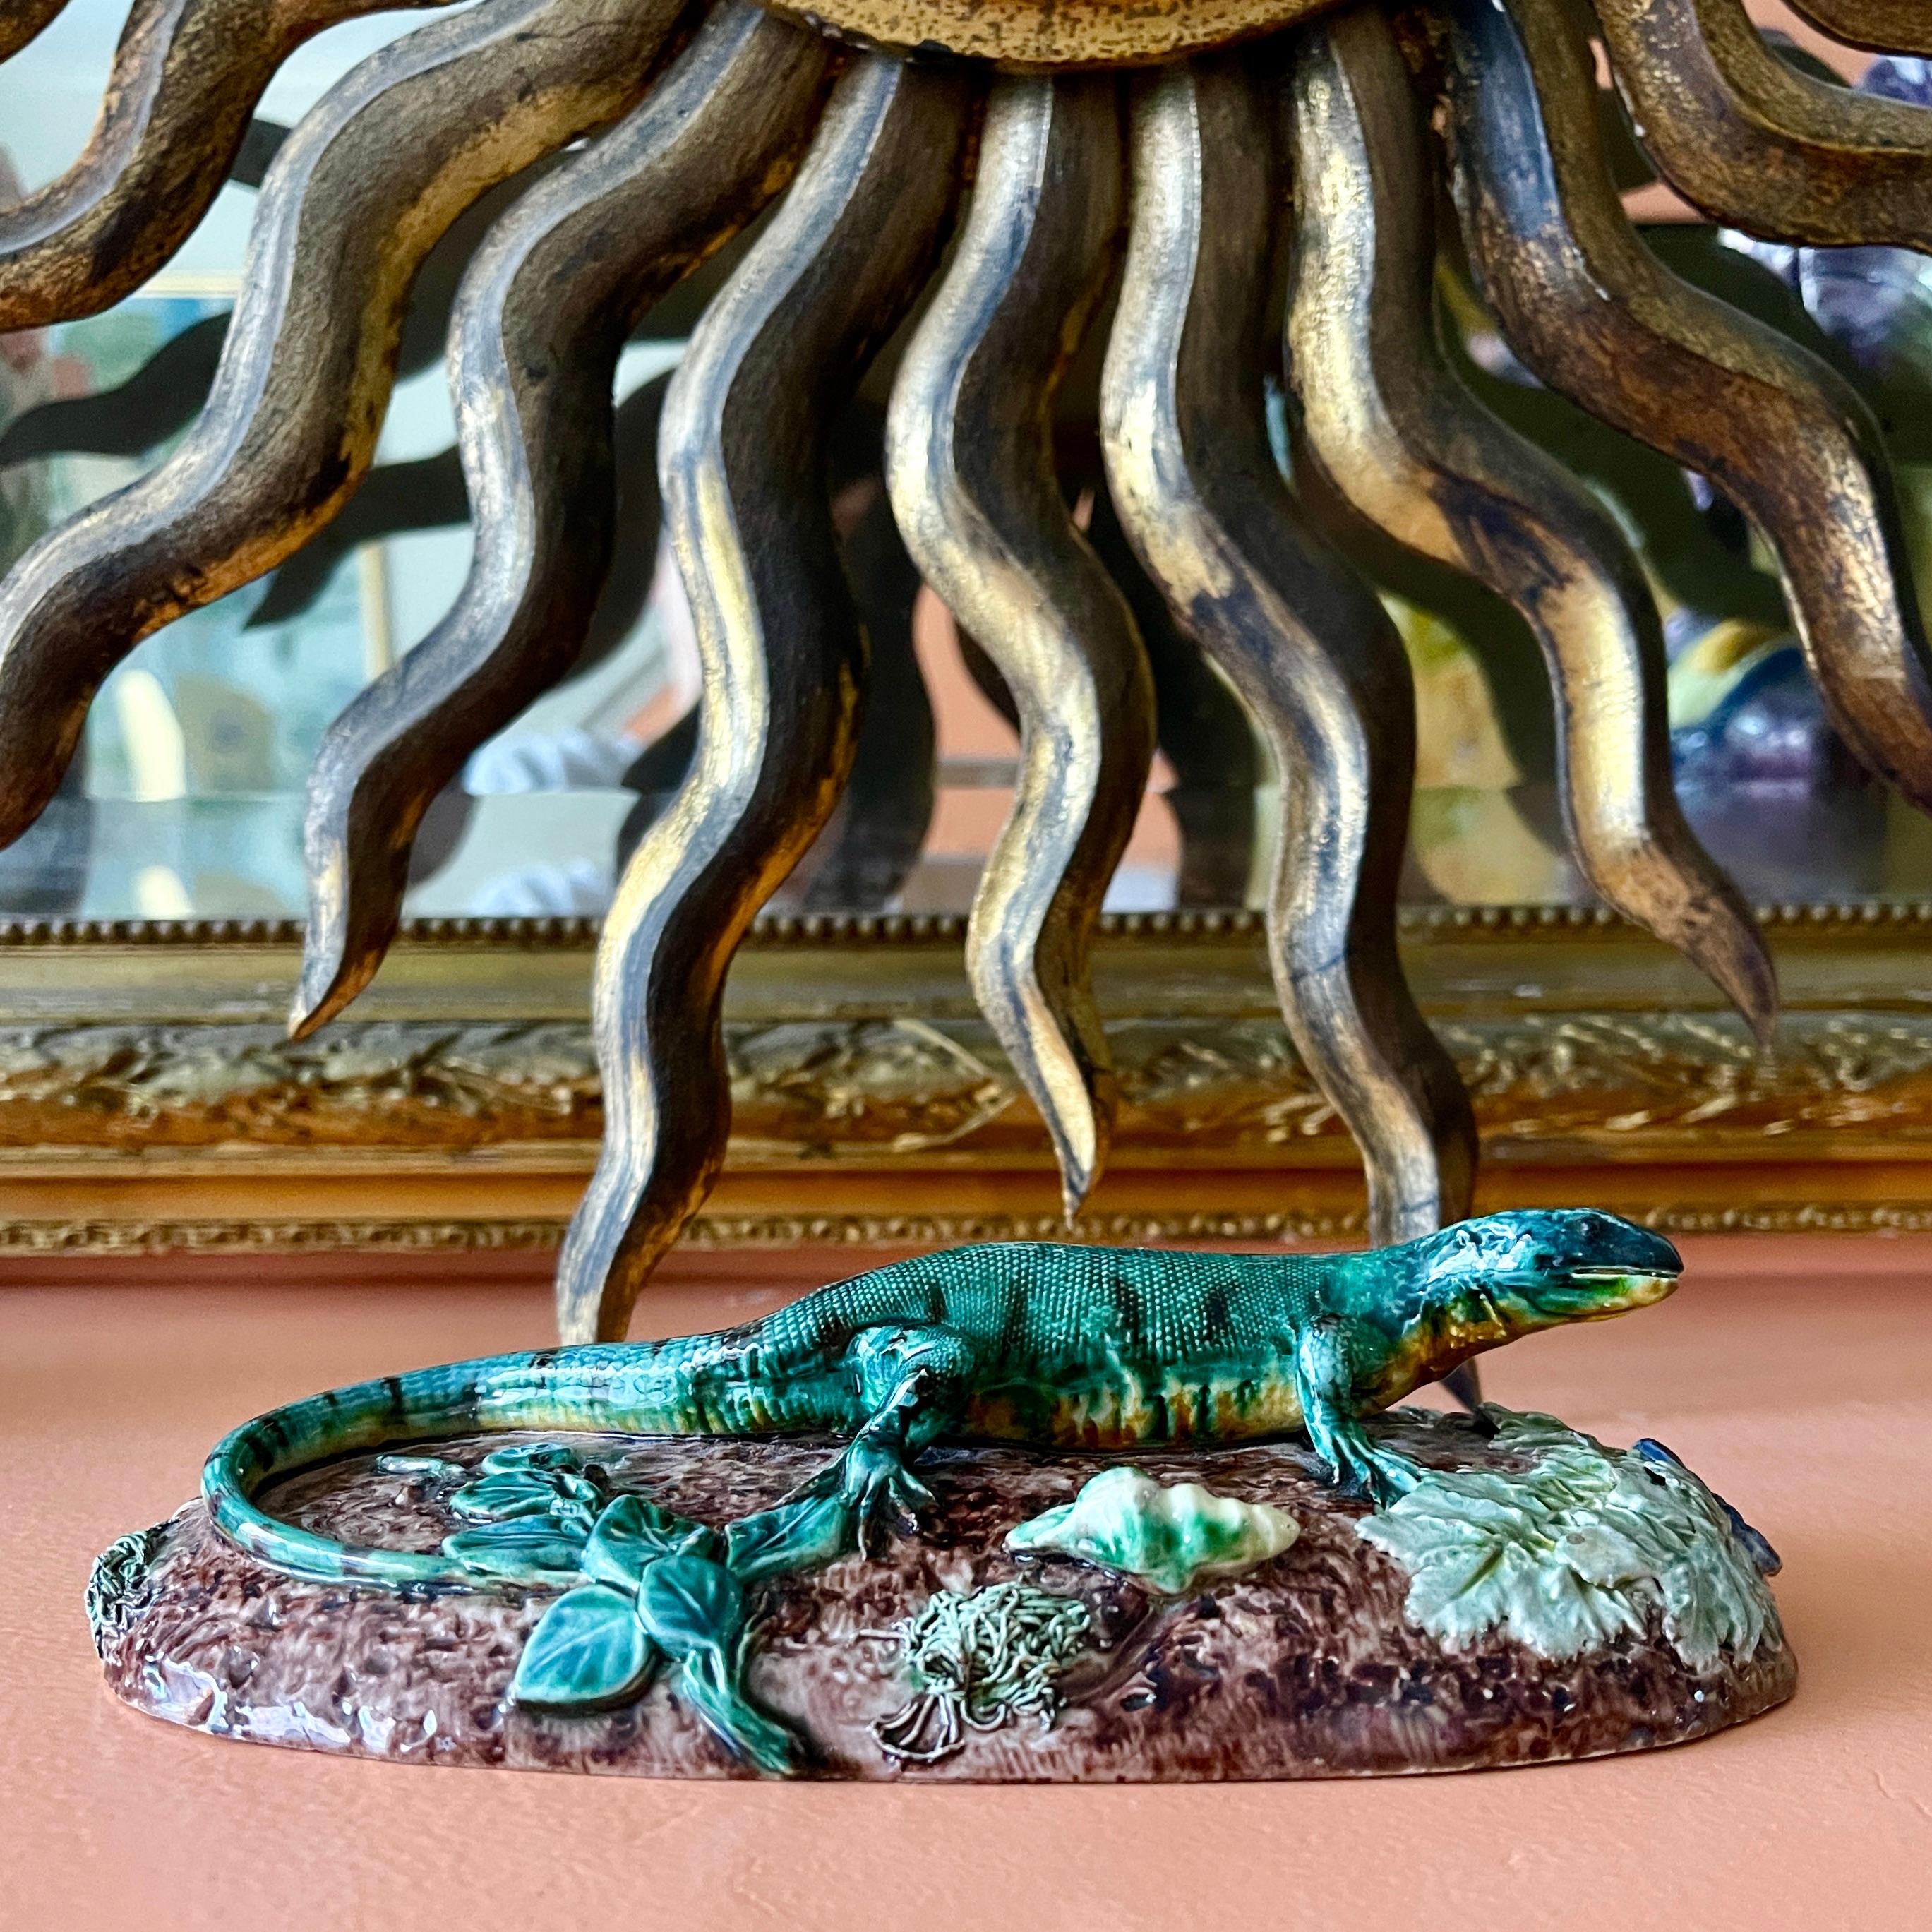 From France, a signed Palissy style majolica paperweight, a lizard on a mound, Thomas Sergent, School of Paris, circa 1875-1879.

Thomas-Victor Sergent developed an enthusiasm for creating “Palissy Ware,” a genre of nineteenth-century ceramics